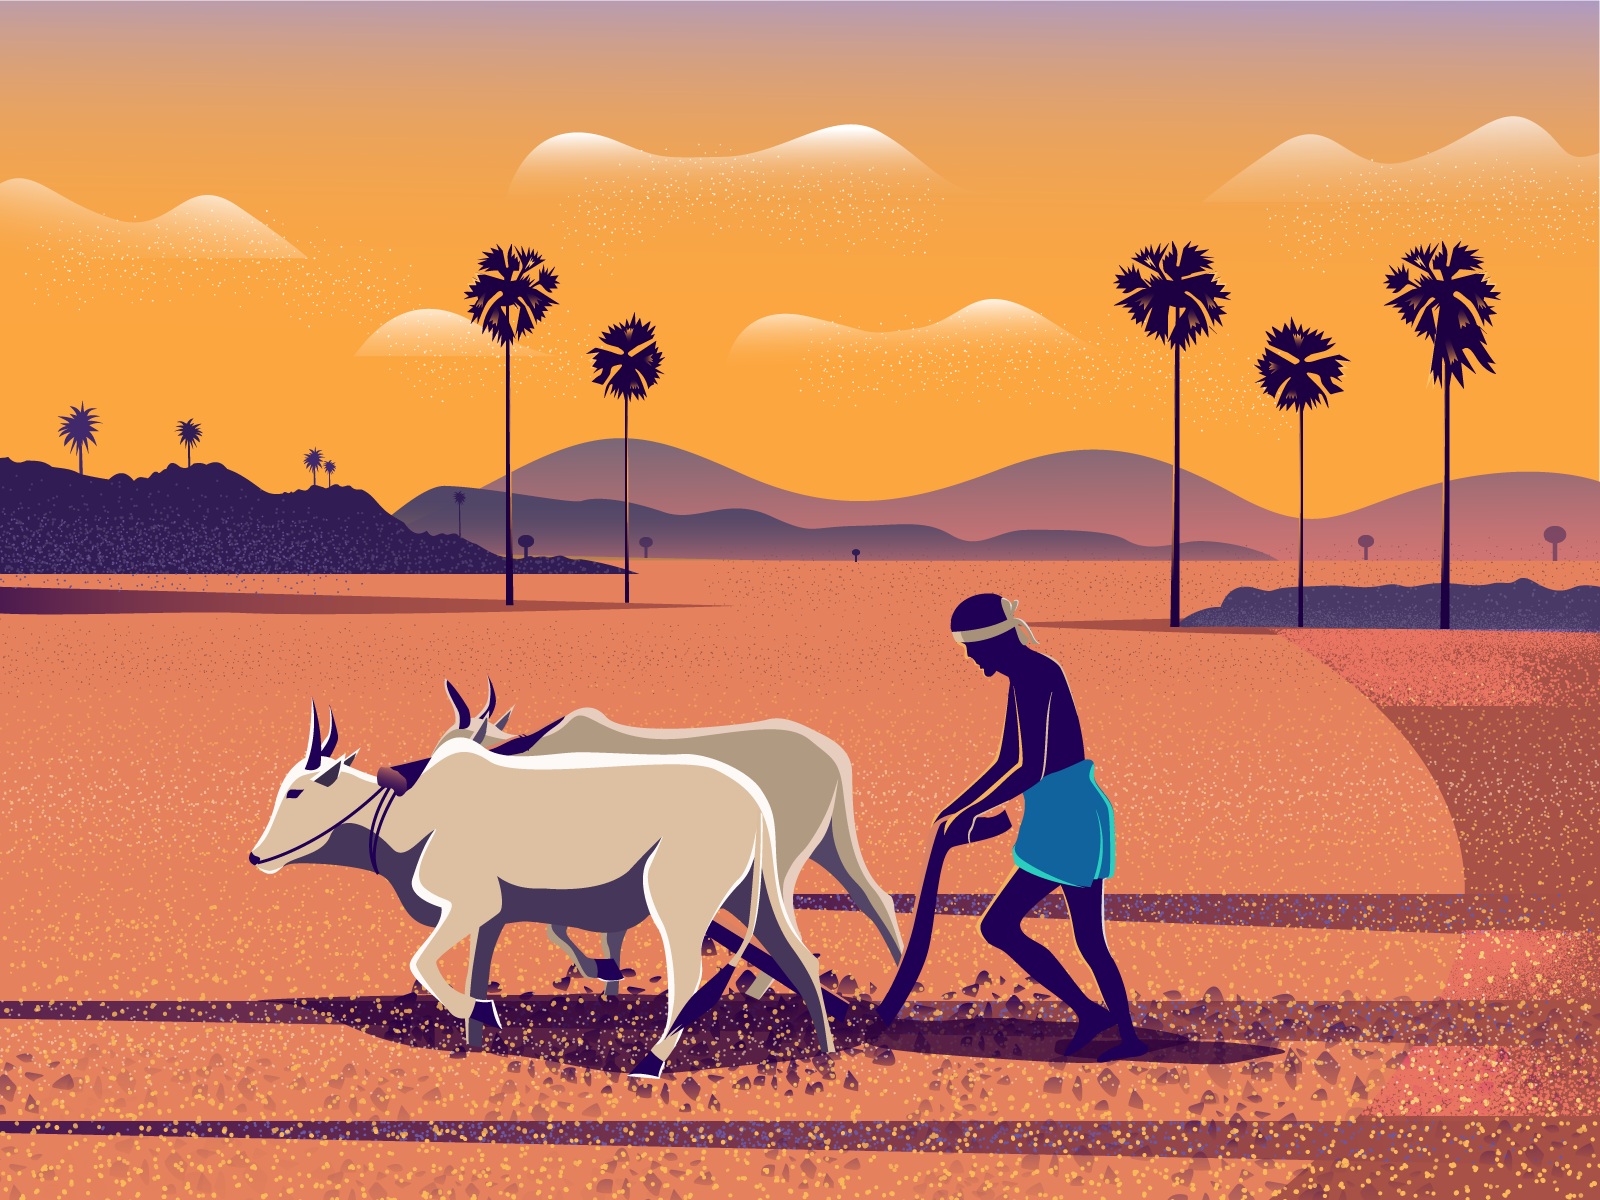 Cultivating Land By Partho Mondal On Dribbble 